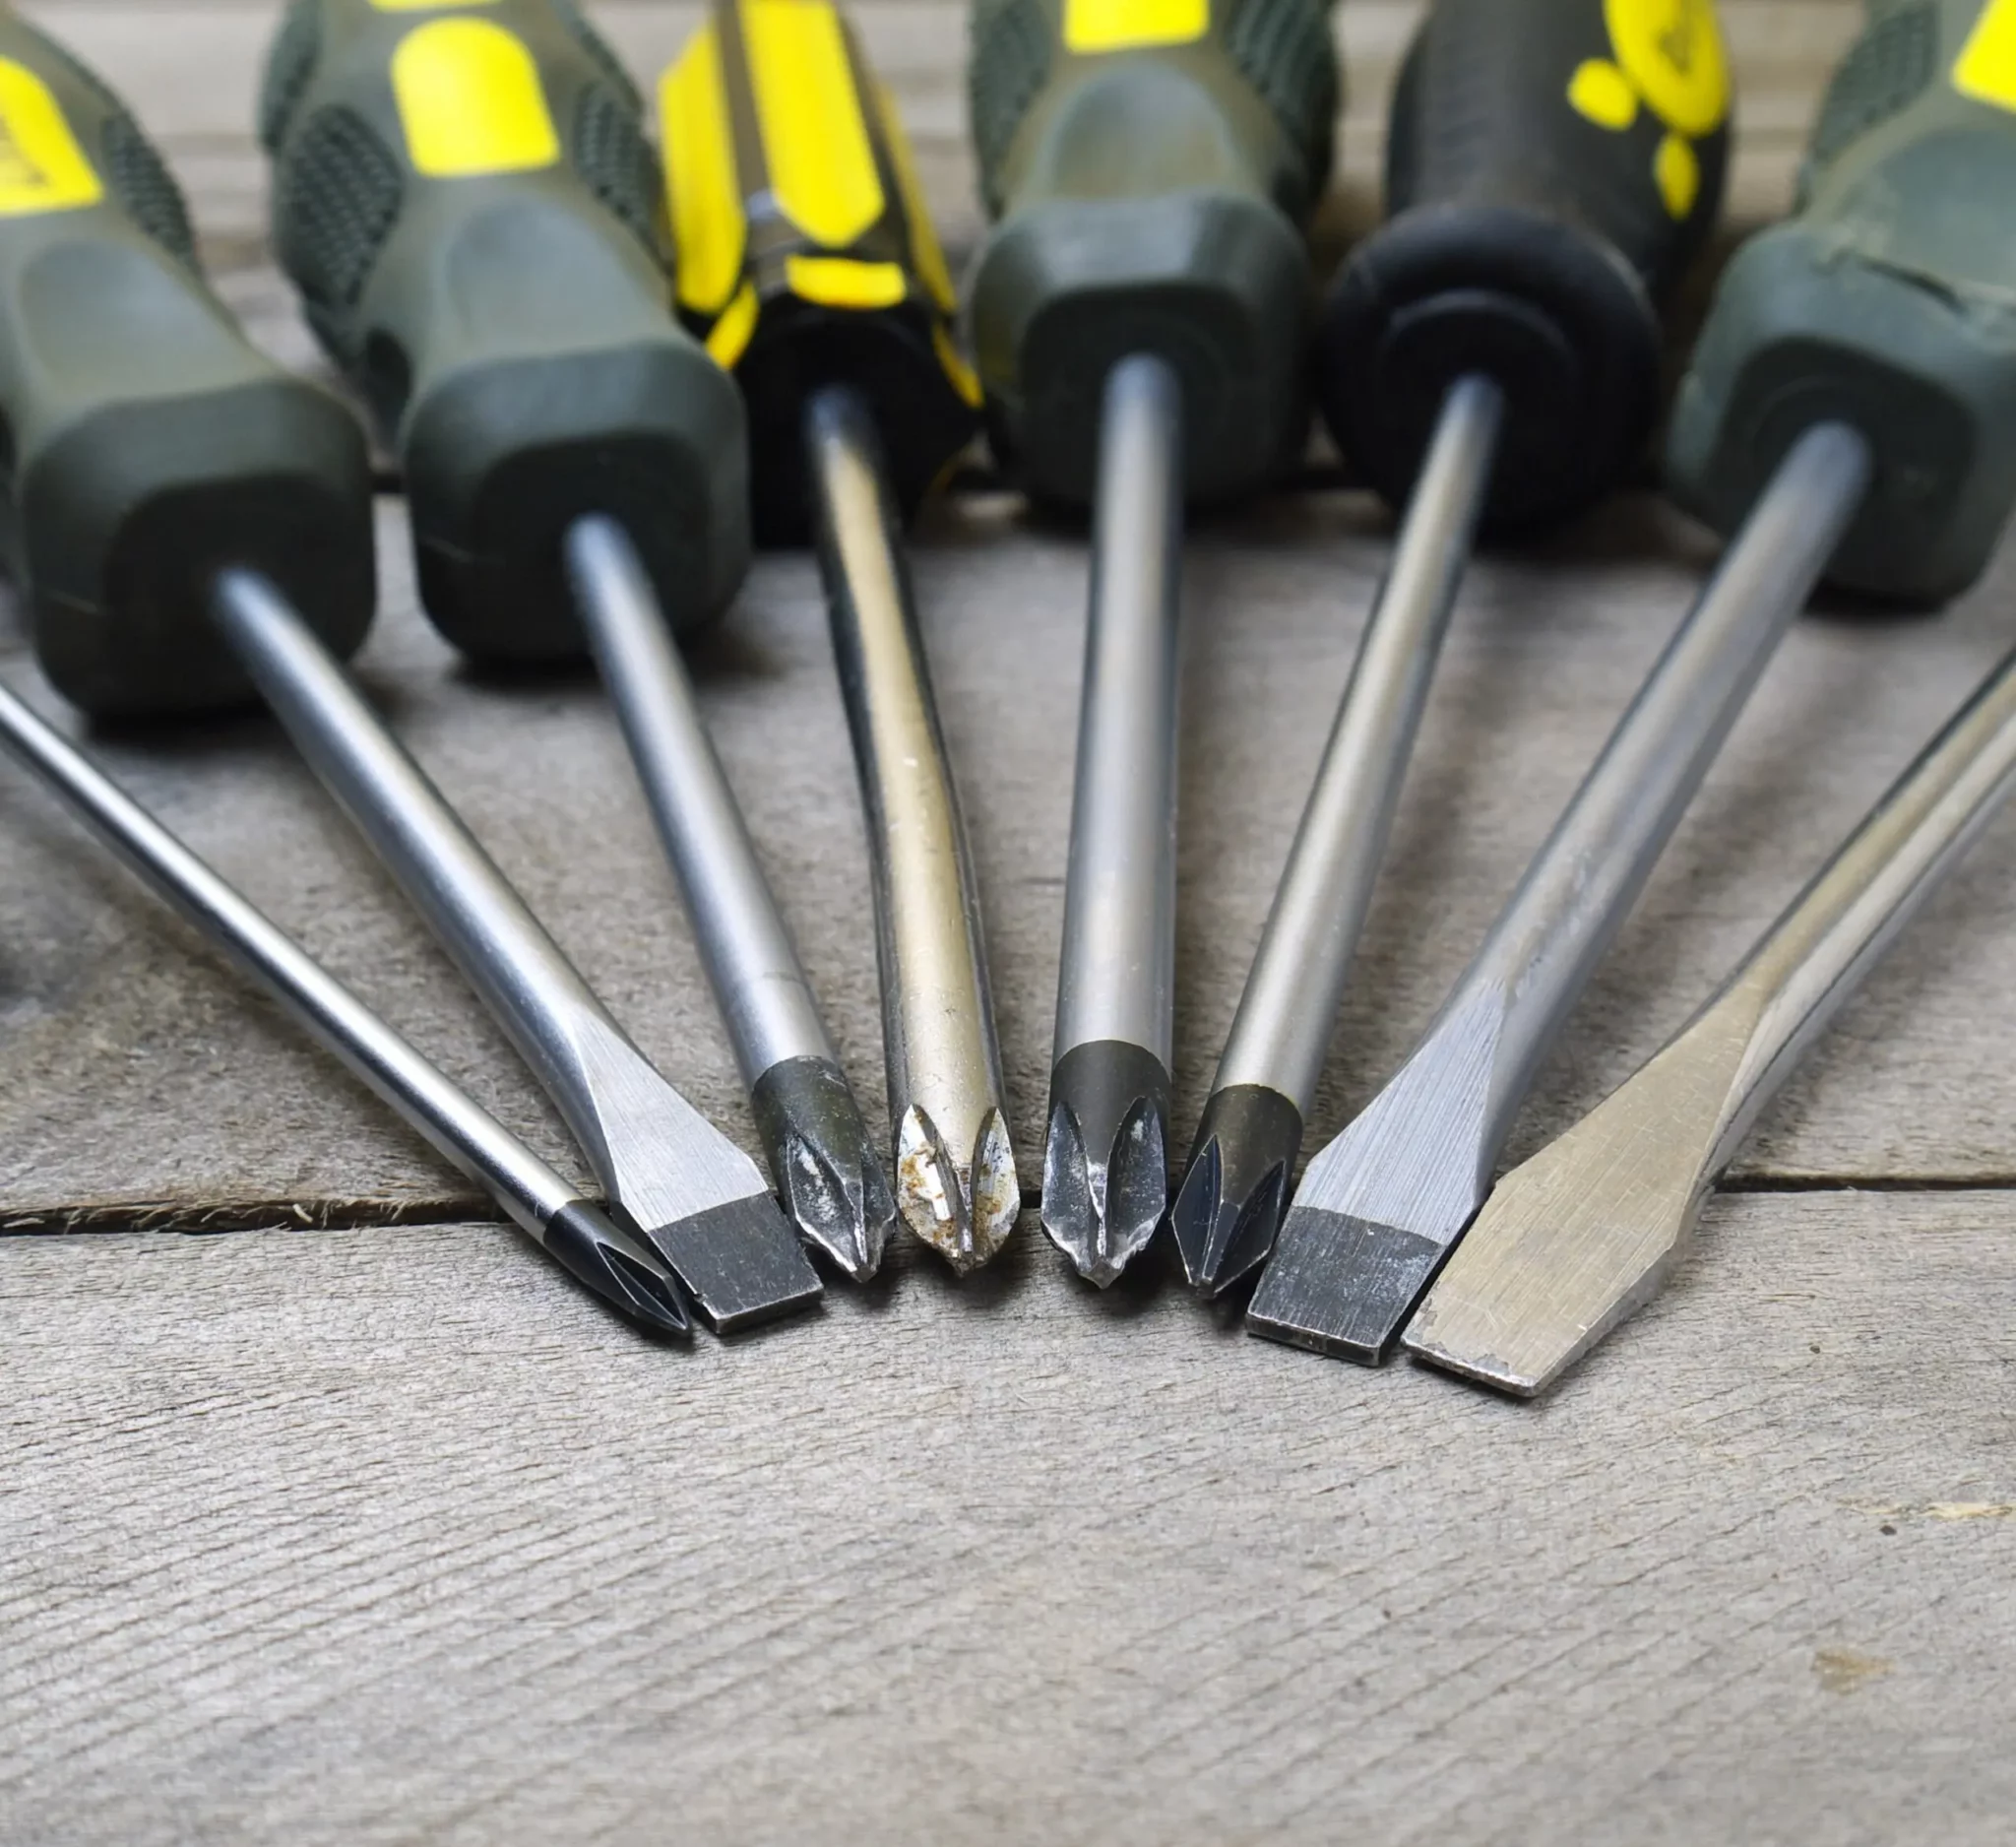 Image of screwdrivers laying on the table